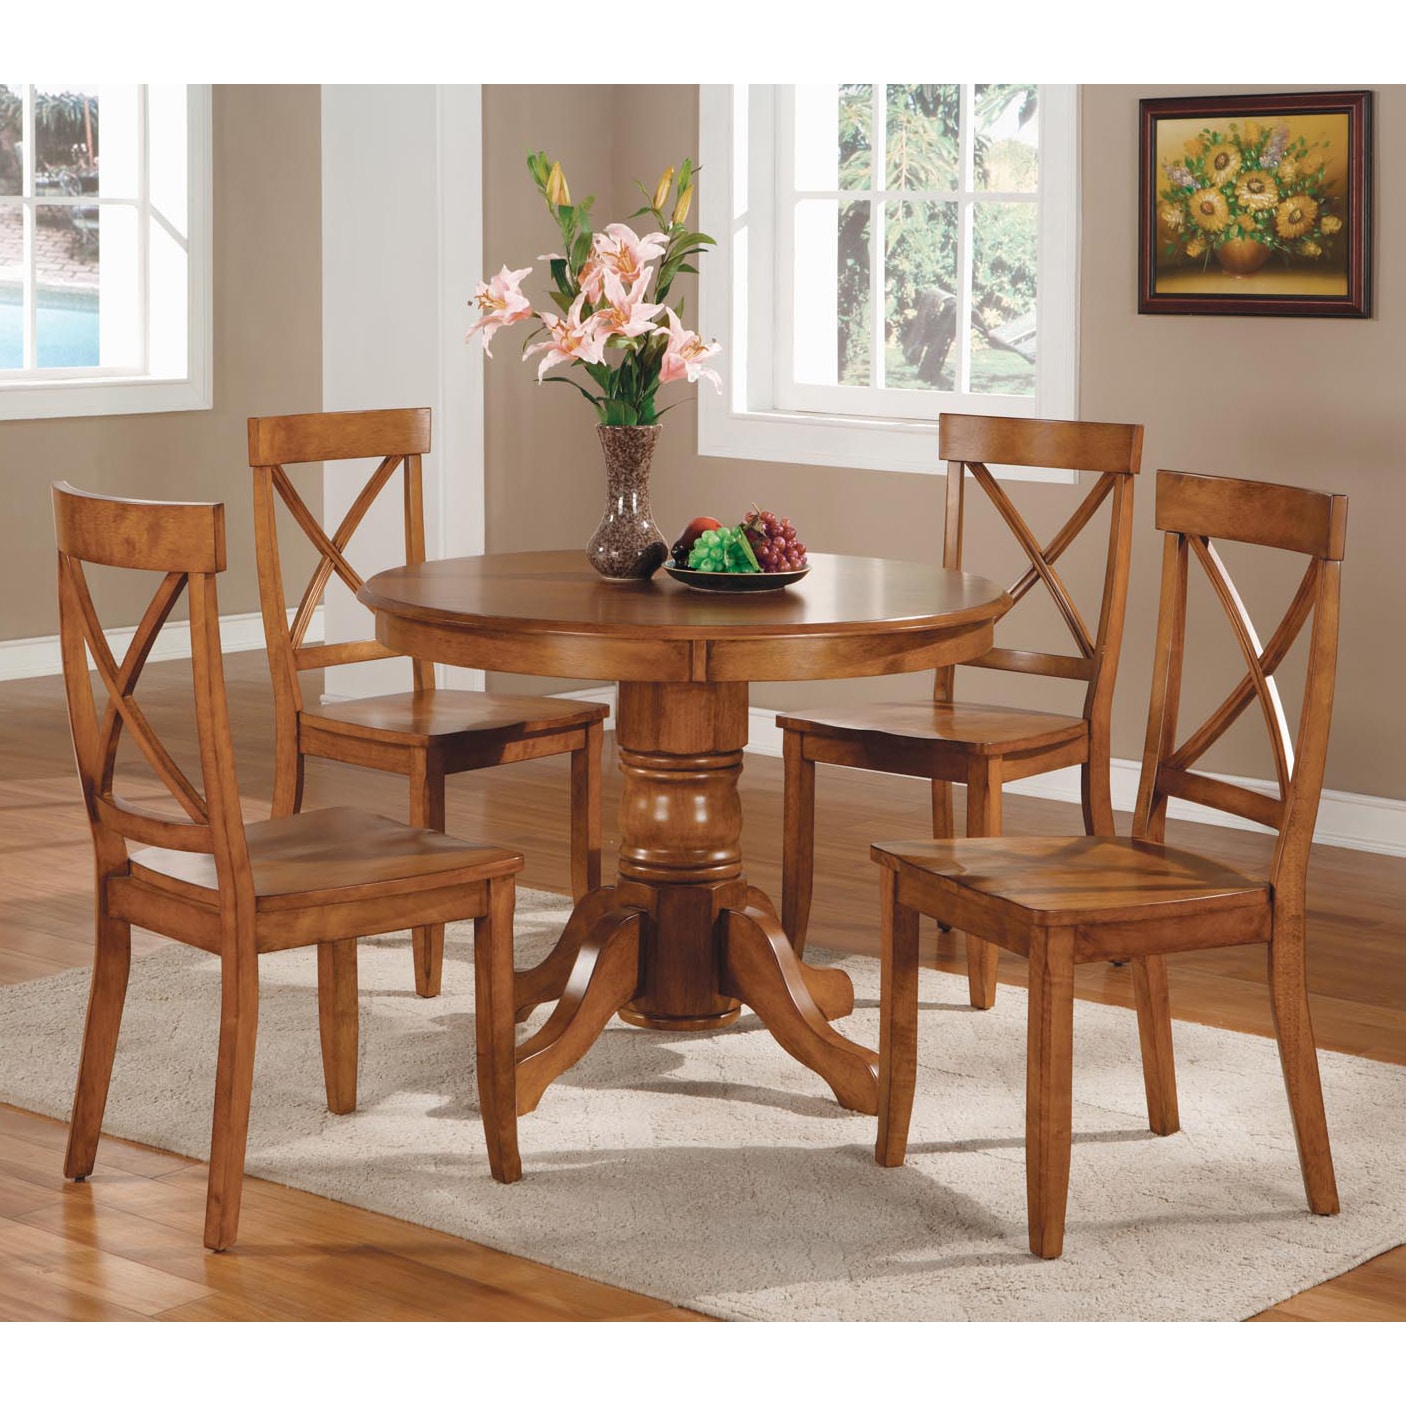 Cottage Oak 5 Piece Dining Furniture Set By Home Styles Free